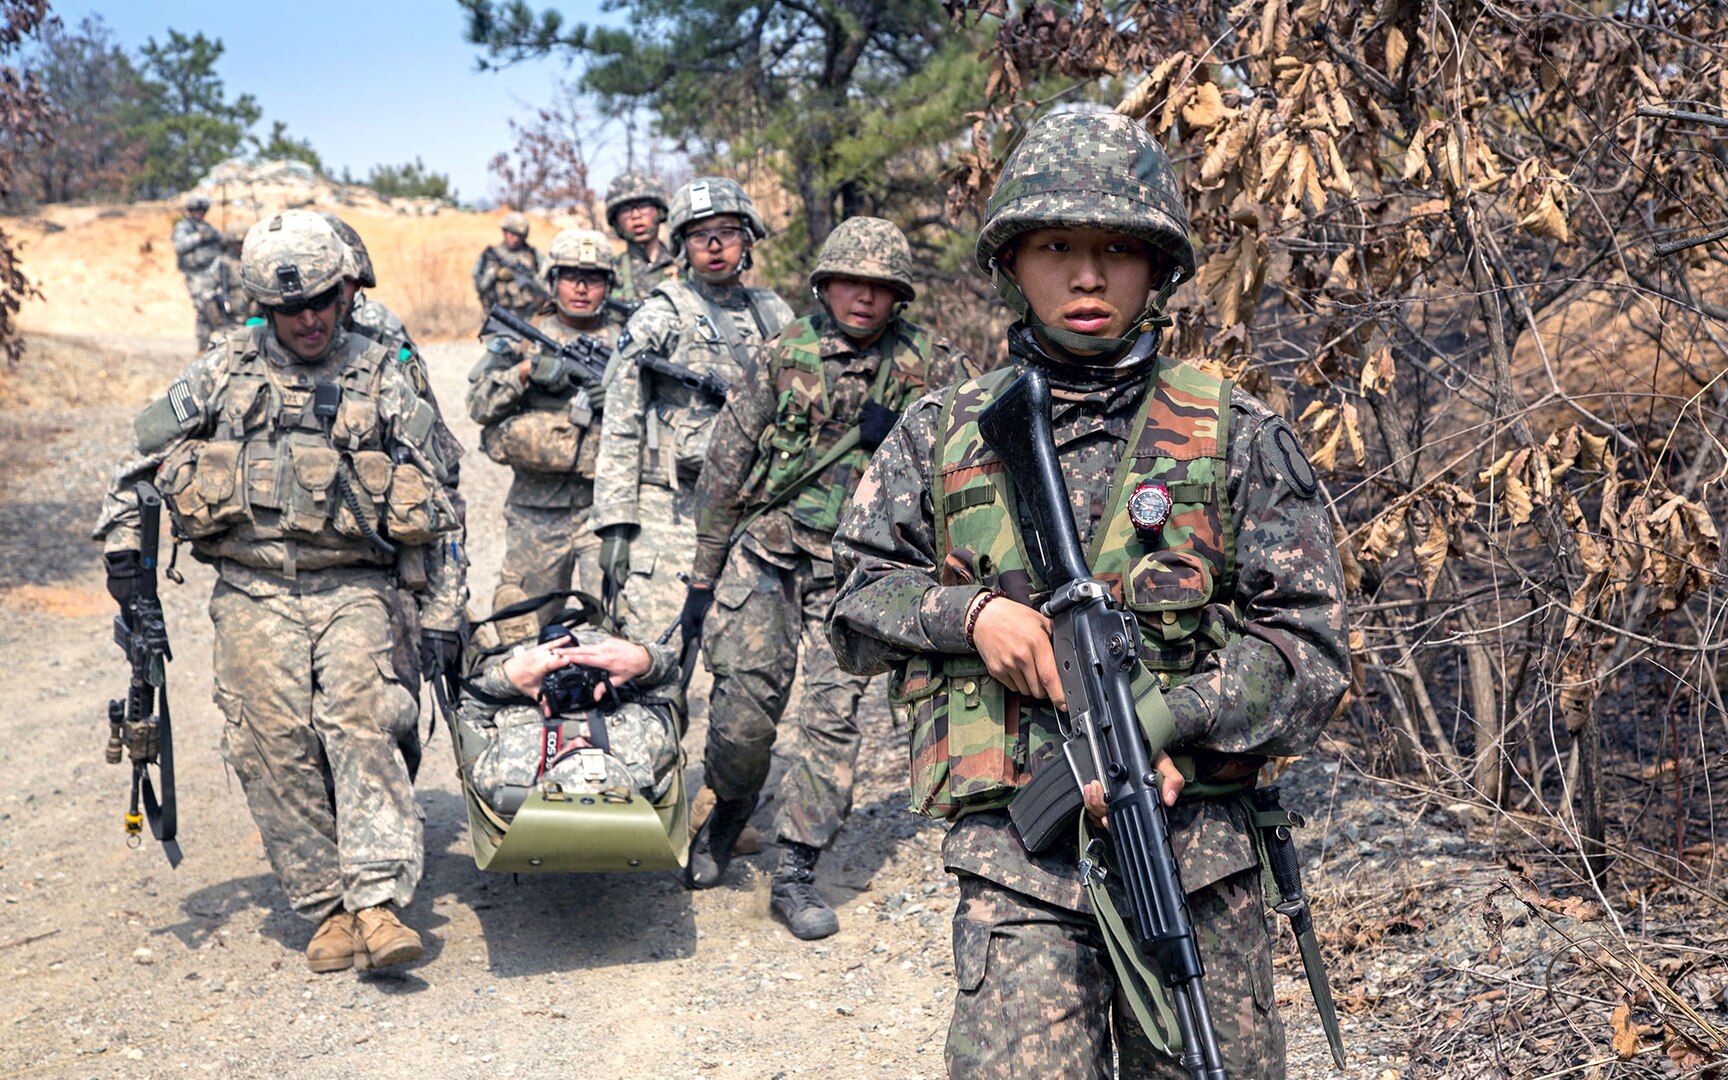 U.S. Soldiers assigned to C Company, 1st Battalion, 27th Infantry Regiment, 2nd Stryker Brigade Combat Team, 25th Infantry Division, move a casualty toward a designated casualty collection point with their Republic of Korea (ROK) Army Soldier counterparts during a platoon live fire training in March near the demilitarized zone in South Korea. 